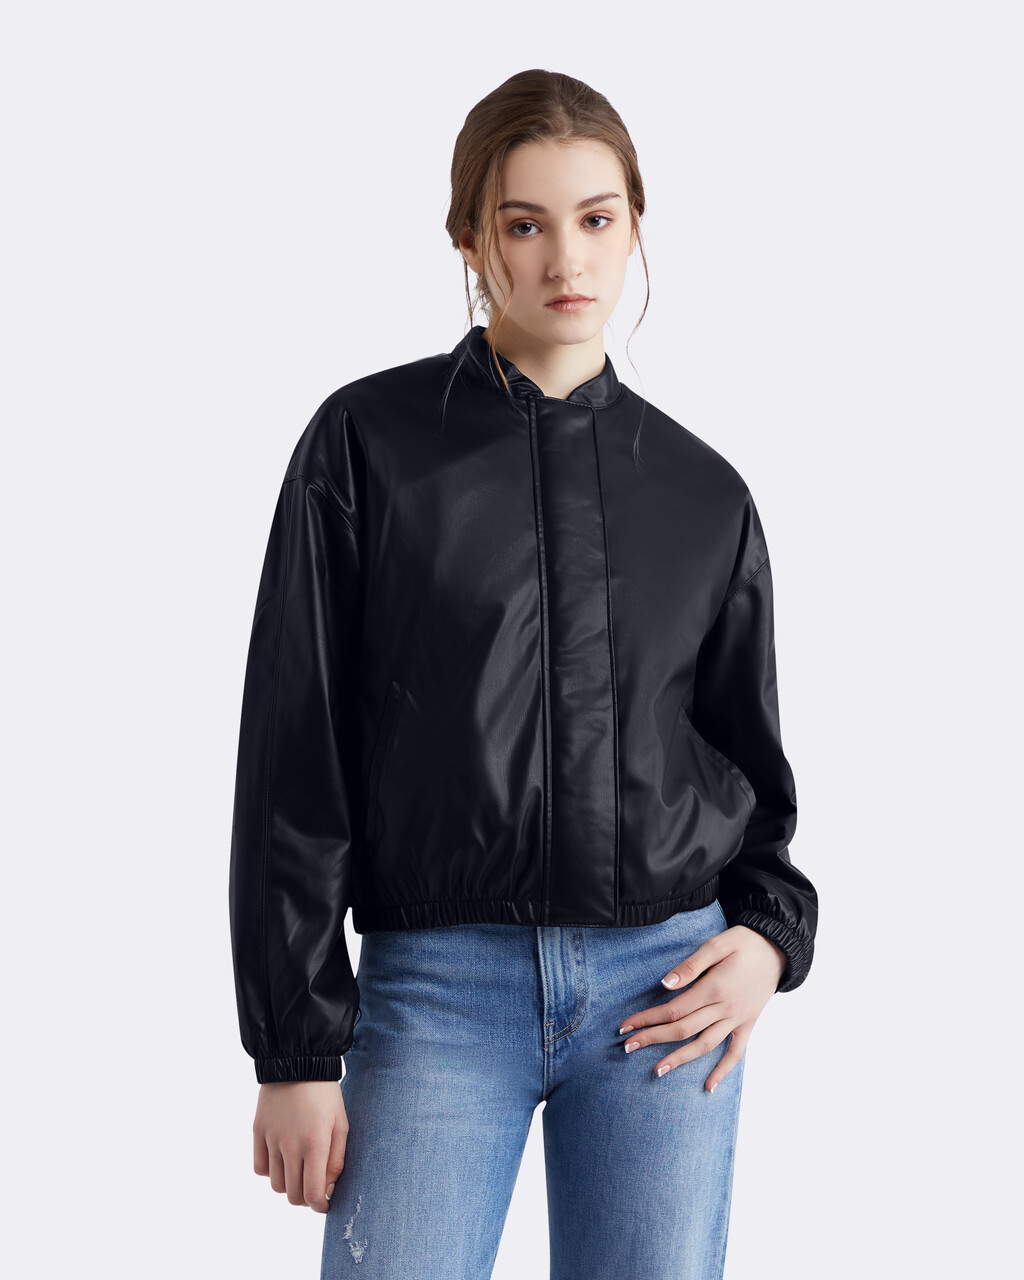 Essential Casual Faux Leather Bomber Jacket, BLACK BEAUTY, hi-res